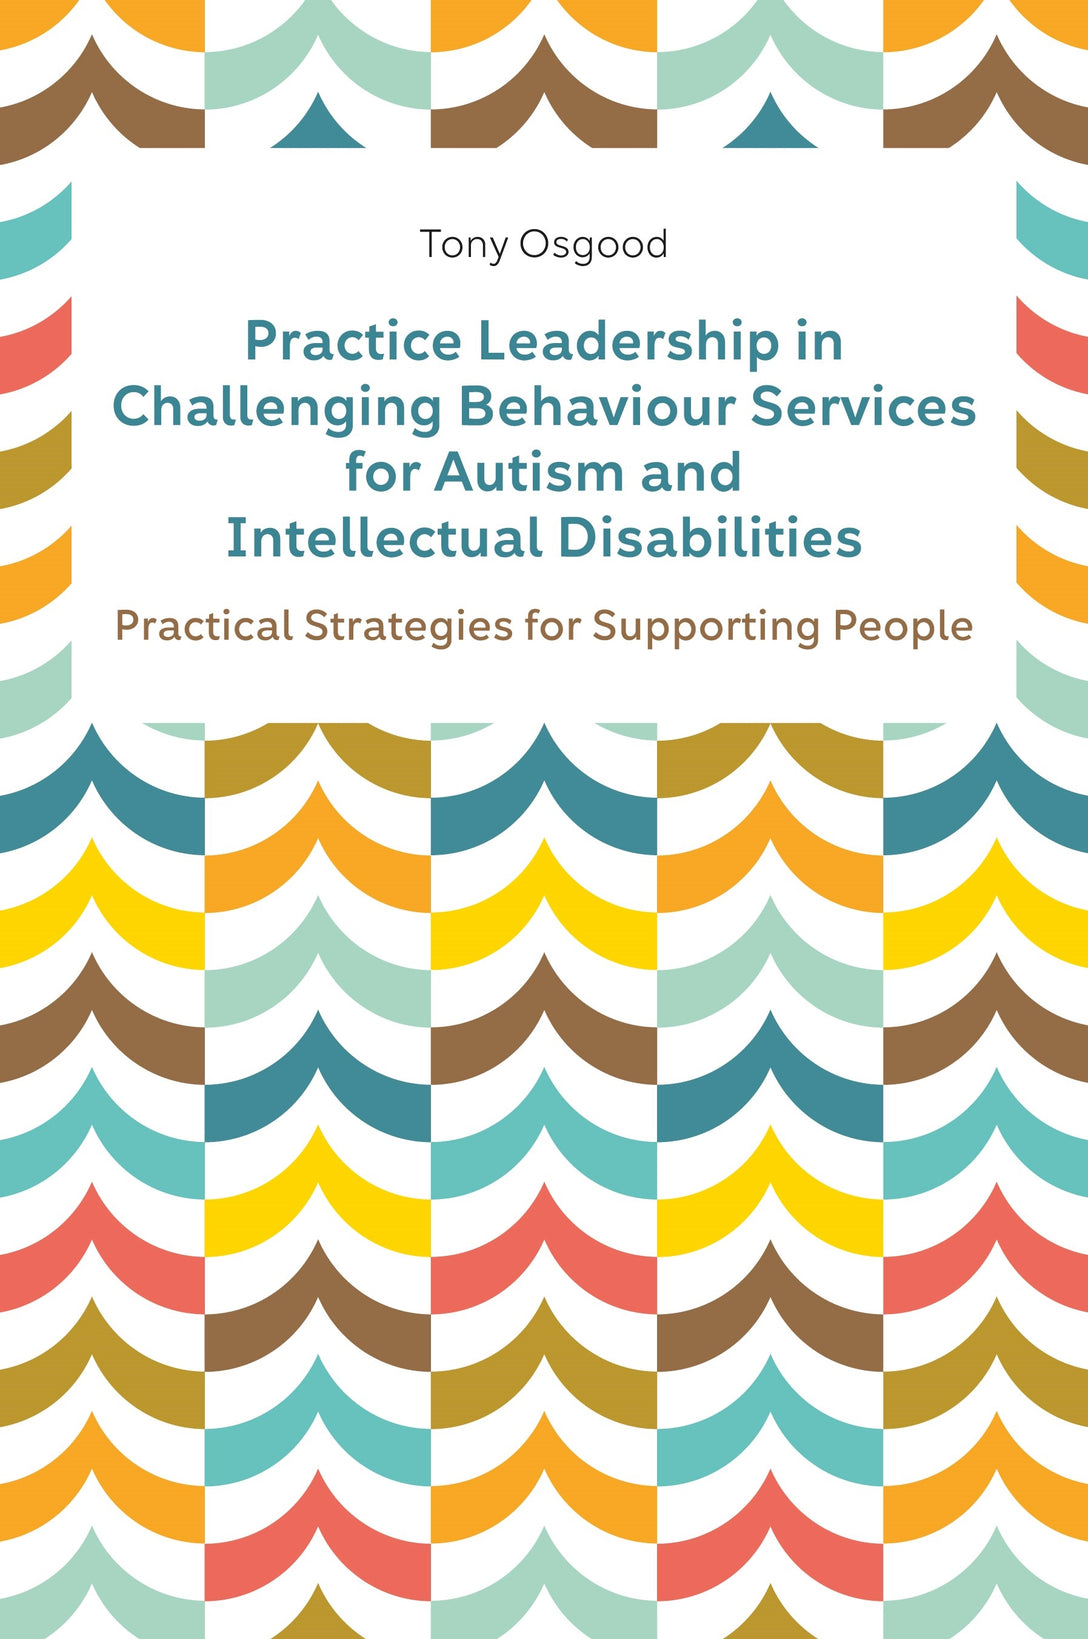 Practice Leadership in Challenging Behaviour Services for Autism and Intellectual Disabilities by Tony Osgood